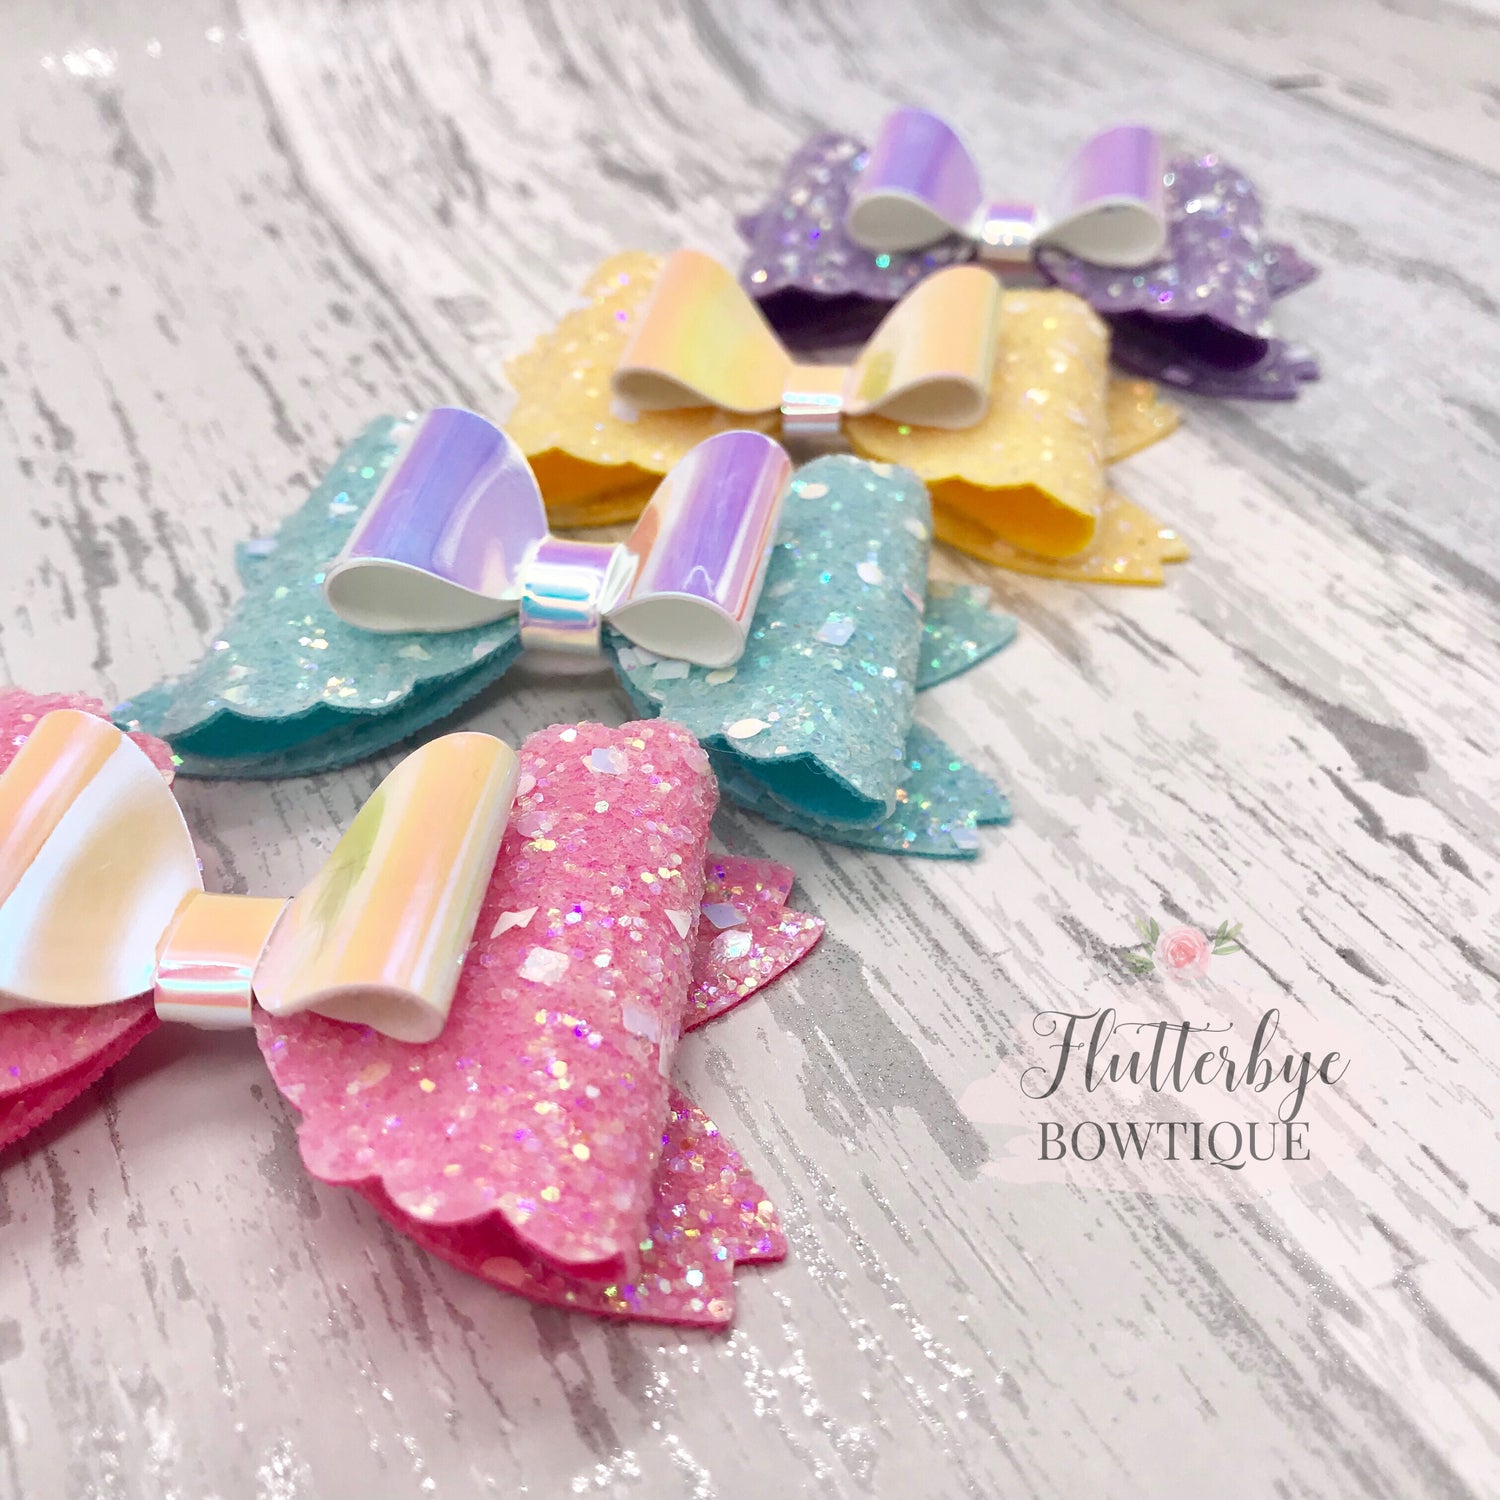 Iridescent Glitter and Mirror Scalloped Double Bow - Flutterbye Bowtique